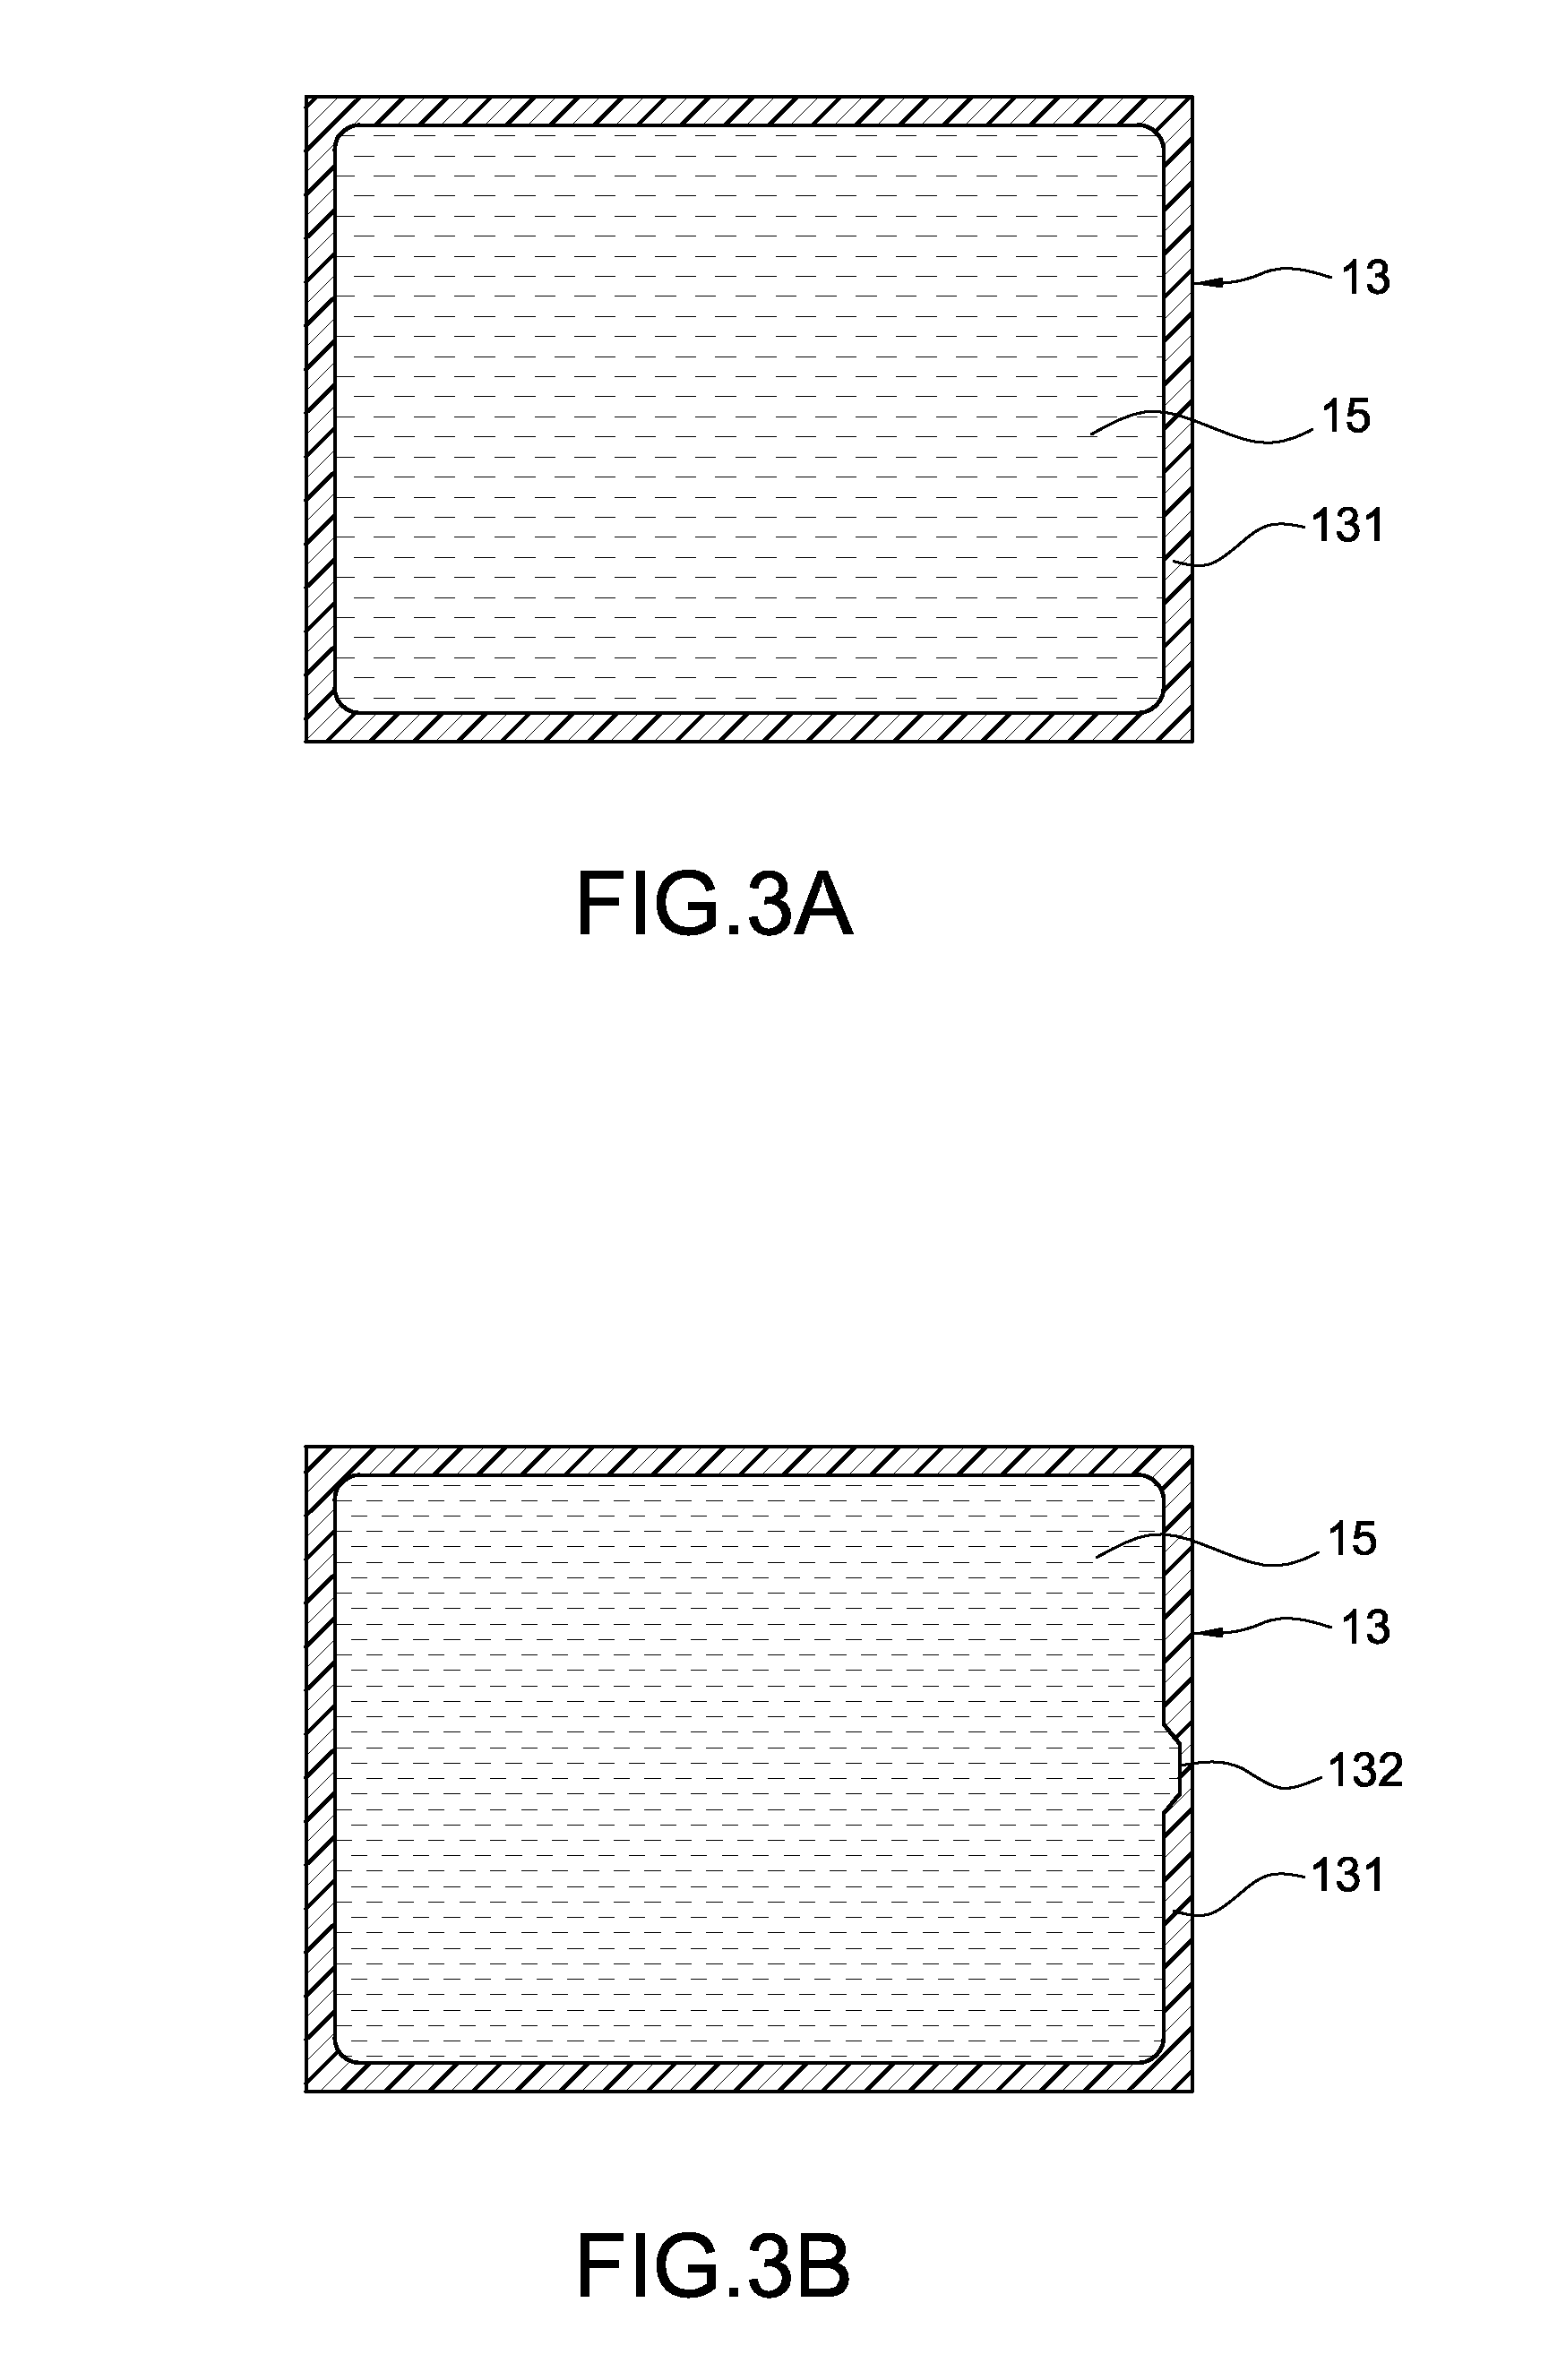 Electrolyte storage structure for a lithium battery